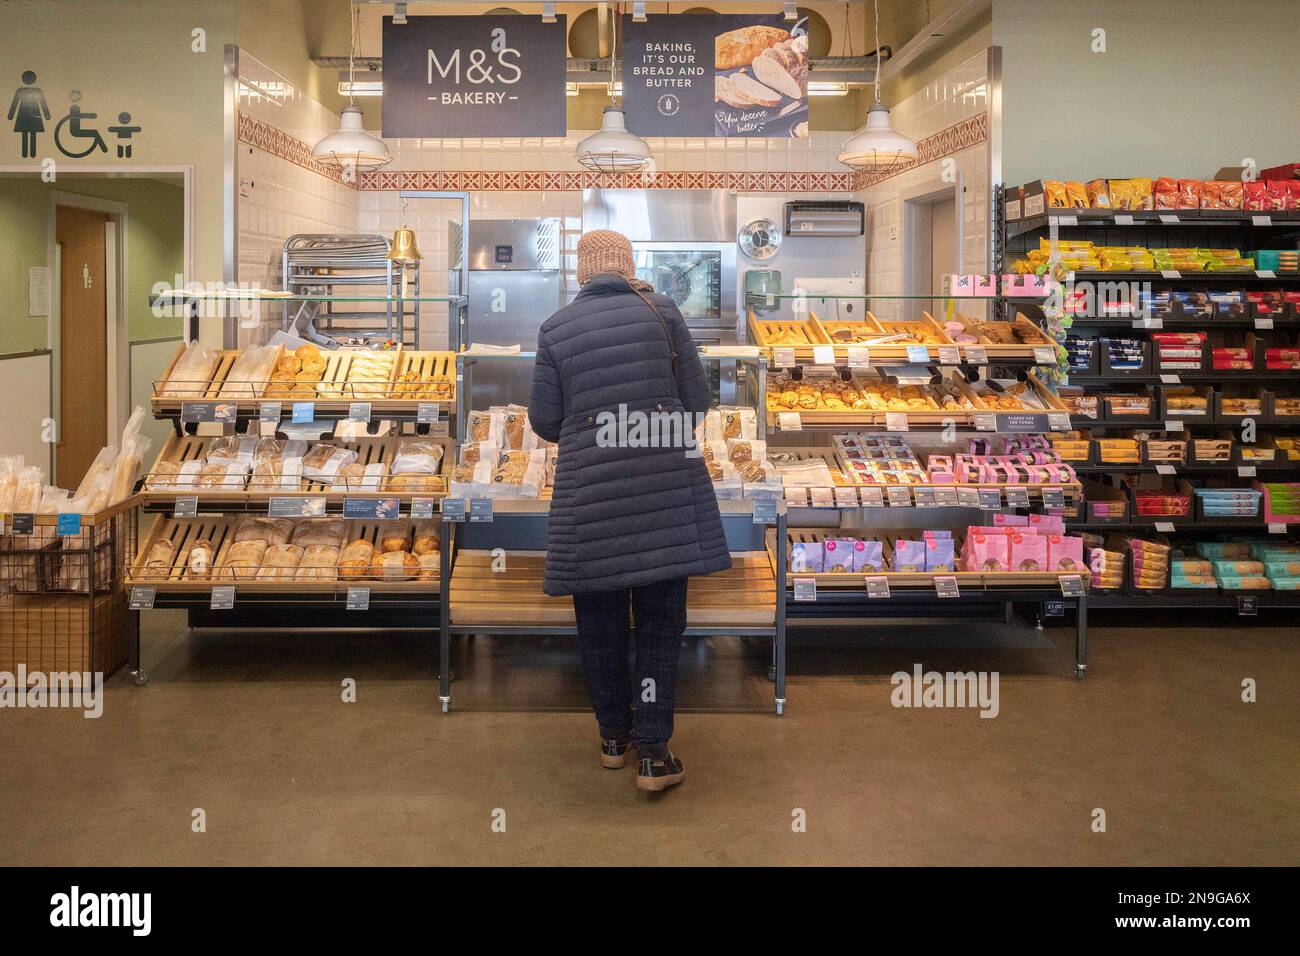 Woman OAP  shopping at a Marks and Spencer Simply Food supermarket Bakery Stock Photo